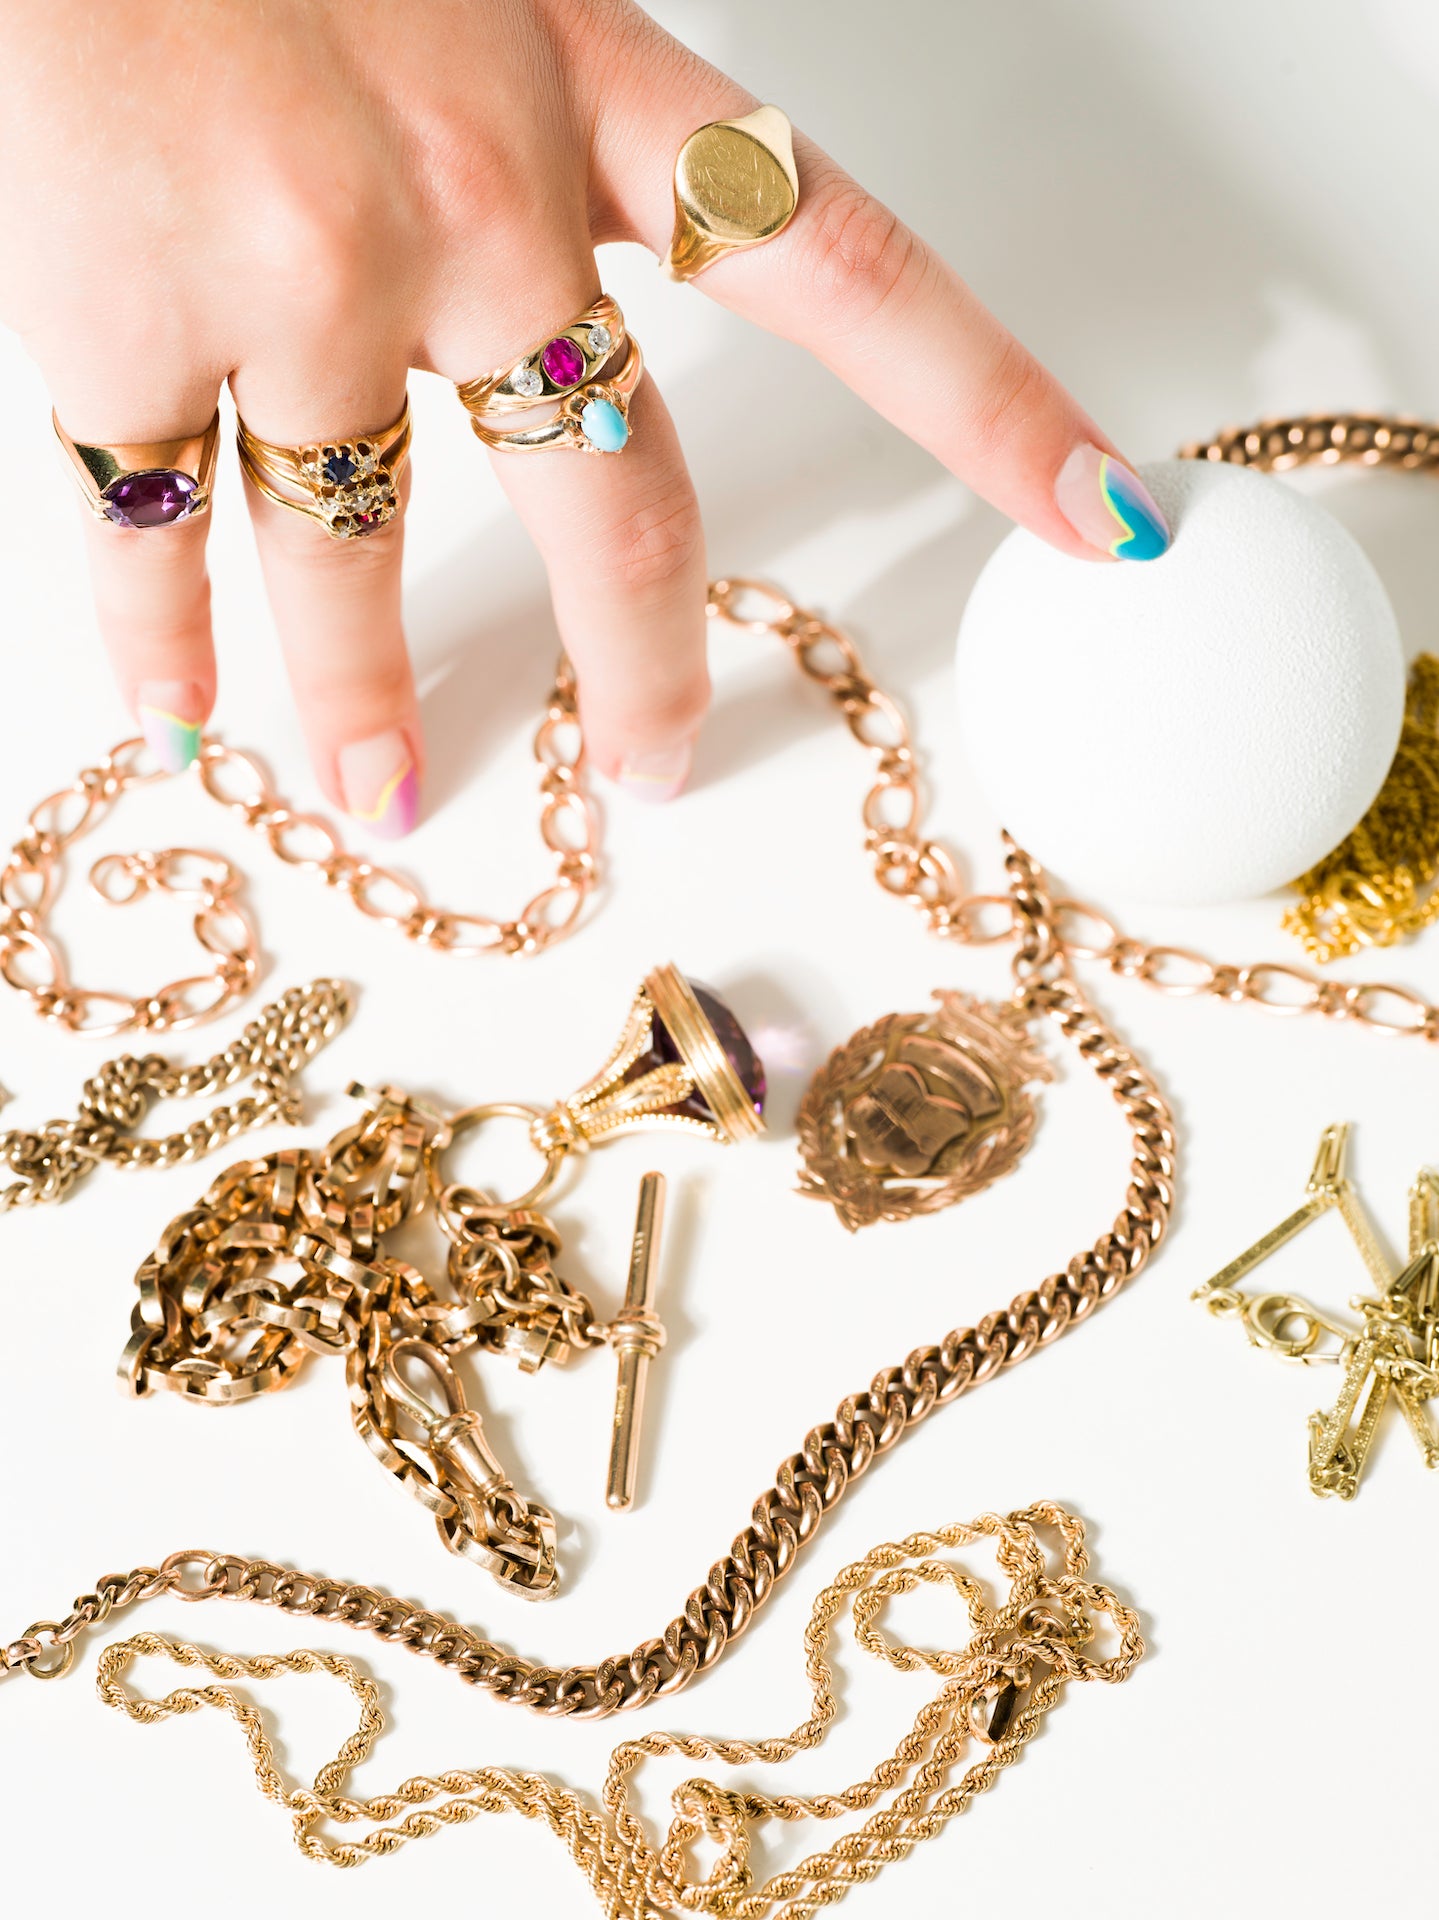 a hand decked out in gold rings and with bright nail art rests among a splayed pile of antique gold chains